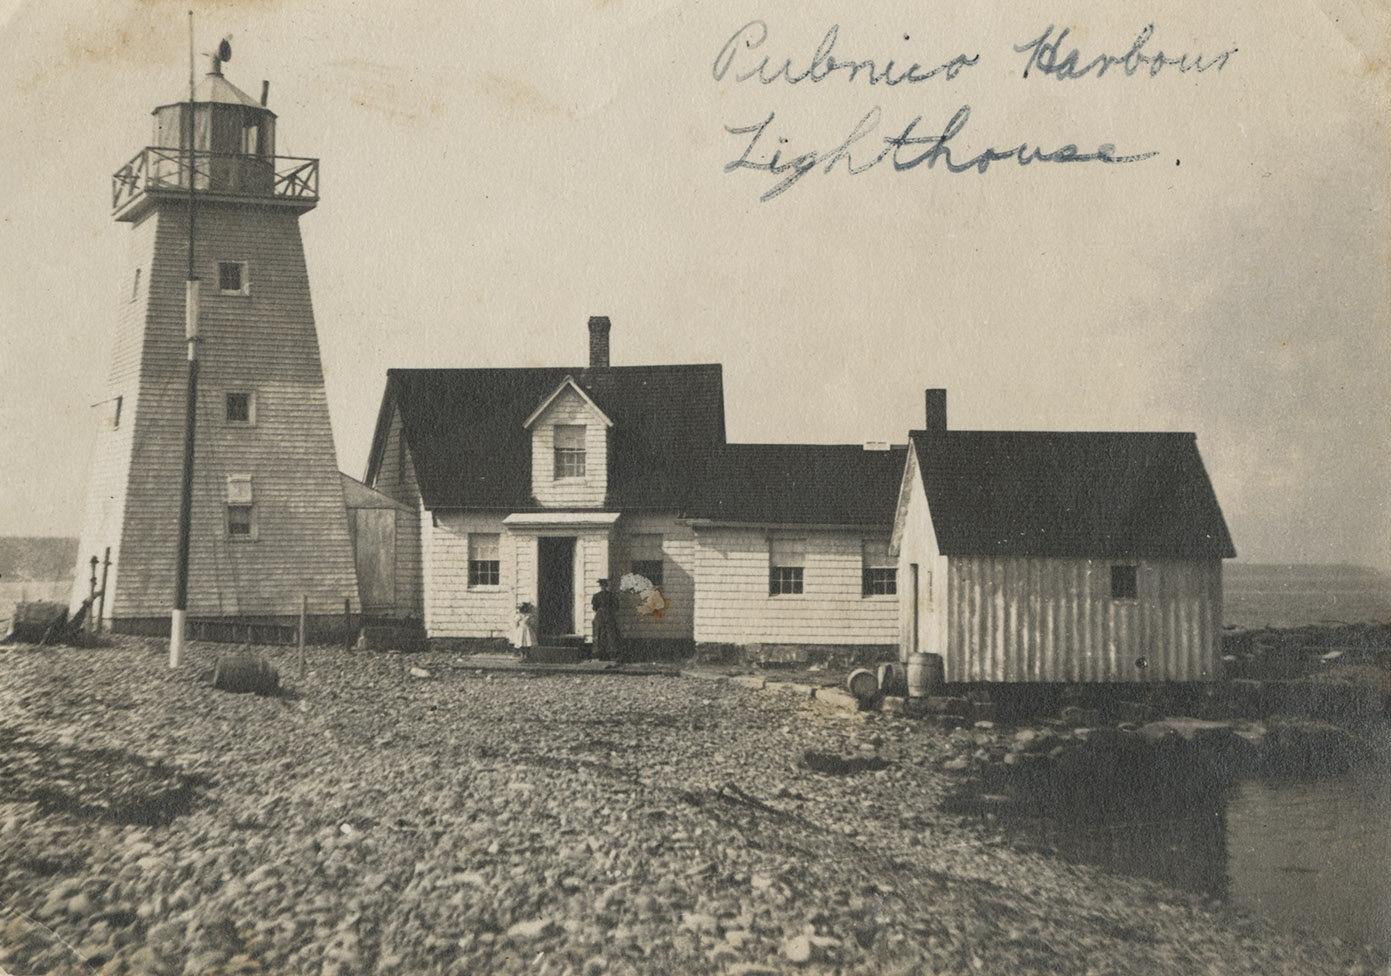 Pubnico Harbour Lighthouse 
Lower East Pubnico